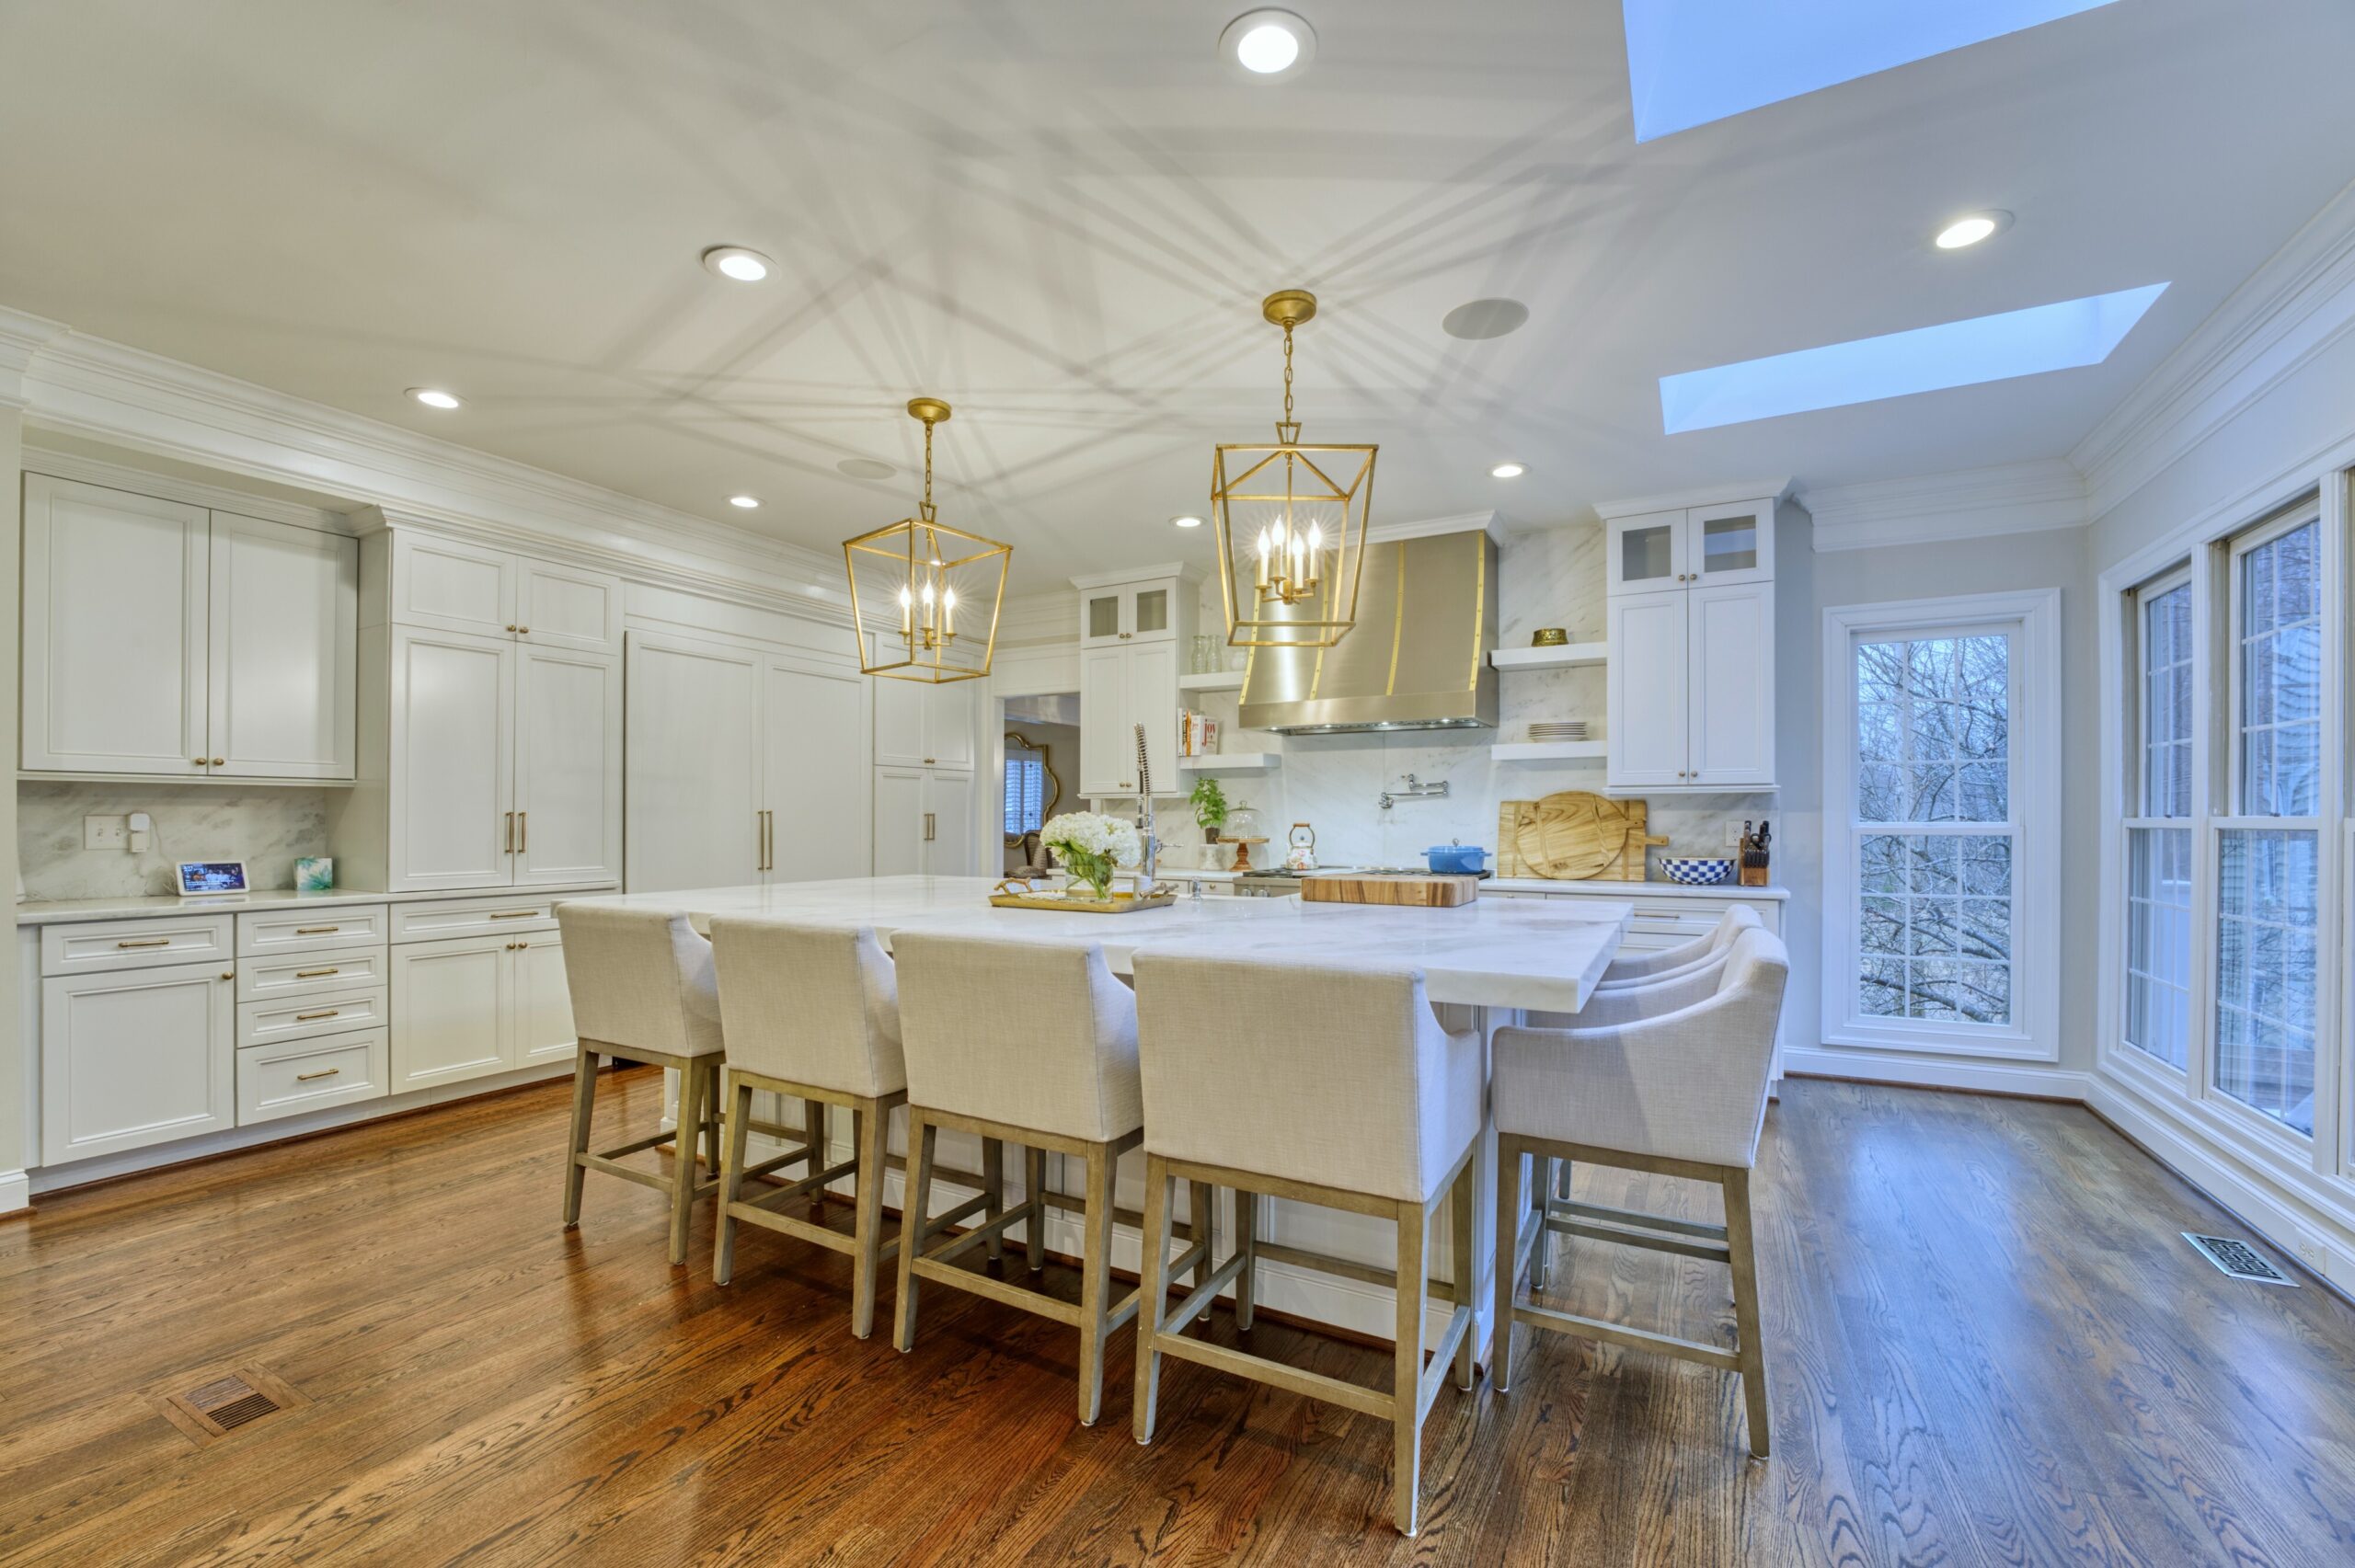 Professional interior photo of 47572 Compton Circle, Sterling, VA - showing the large open kitchen and island, skylights, white cabinets, and brushed gold accents